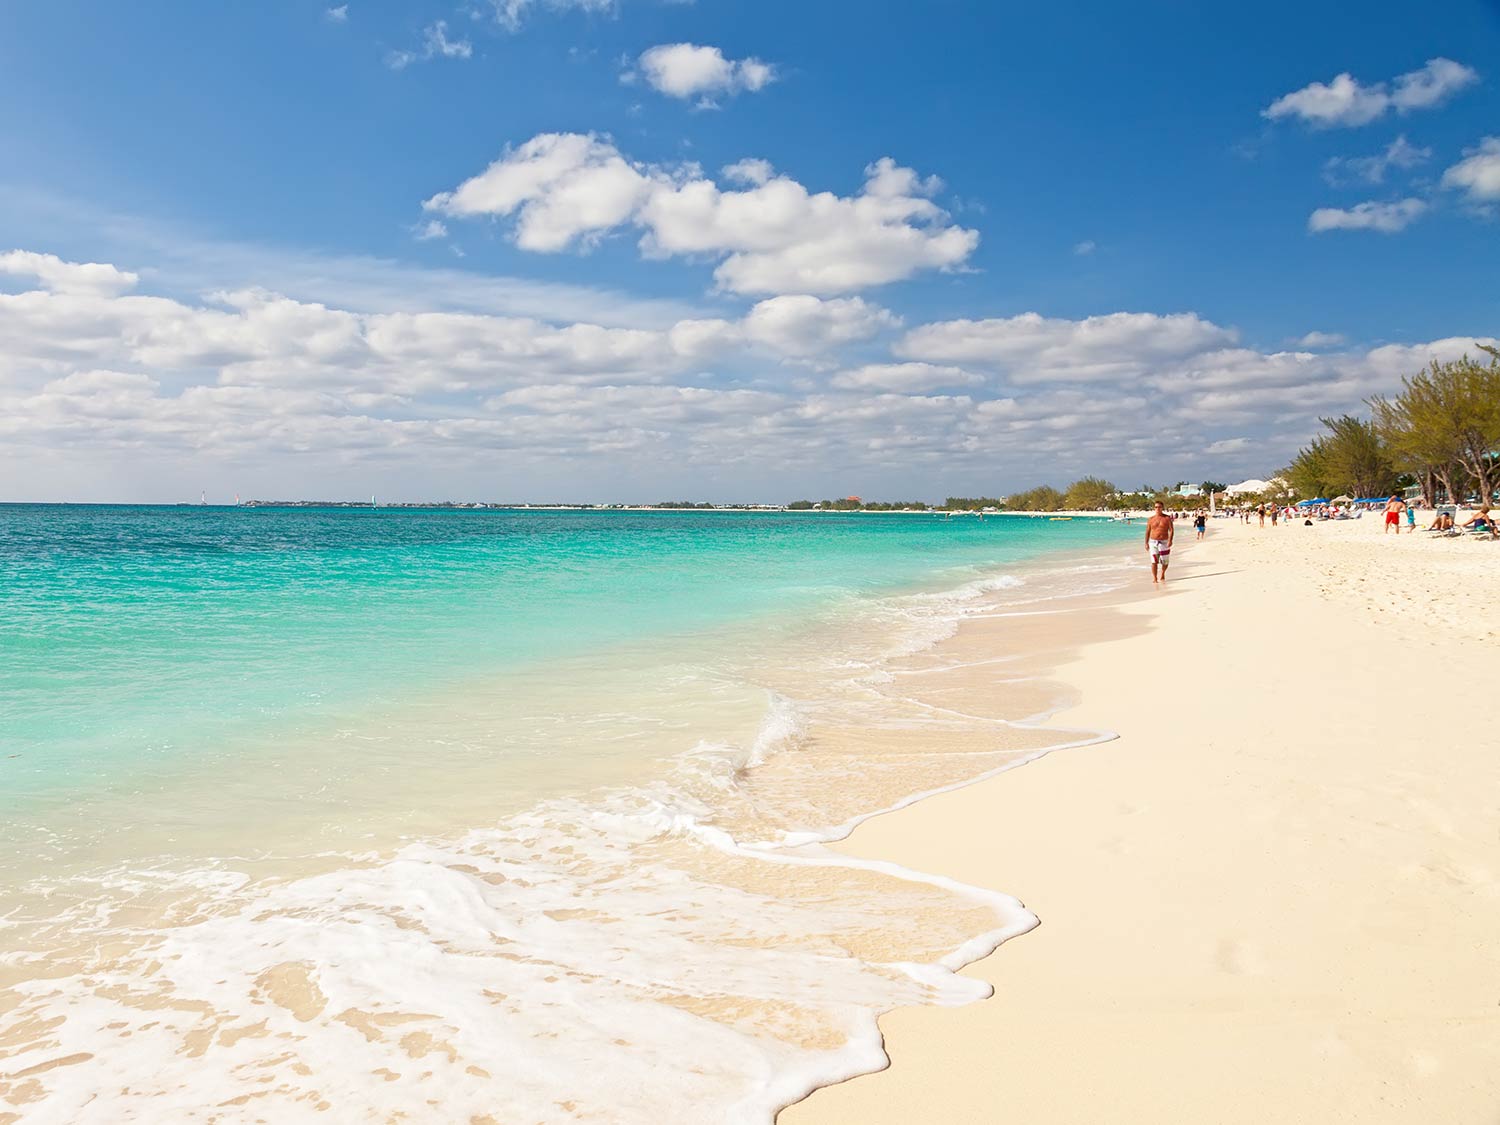 Seven Mile Beach is one of the most popular beaches in the Cayman Islands and often makes lists of the best beaches in the Caribbean.